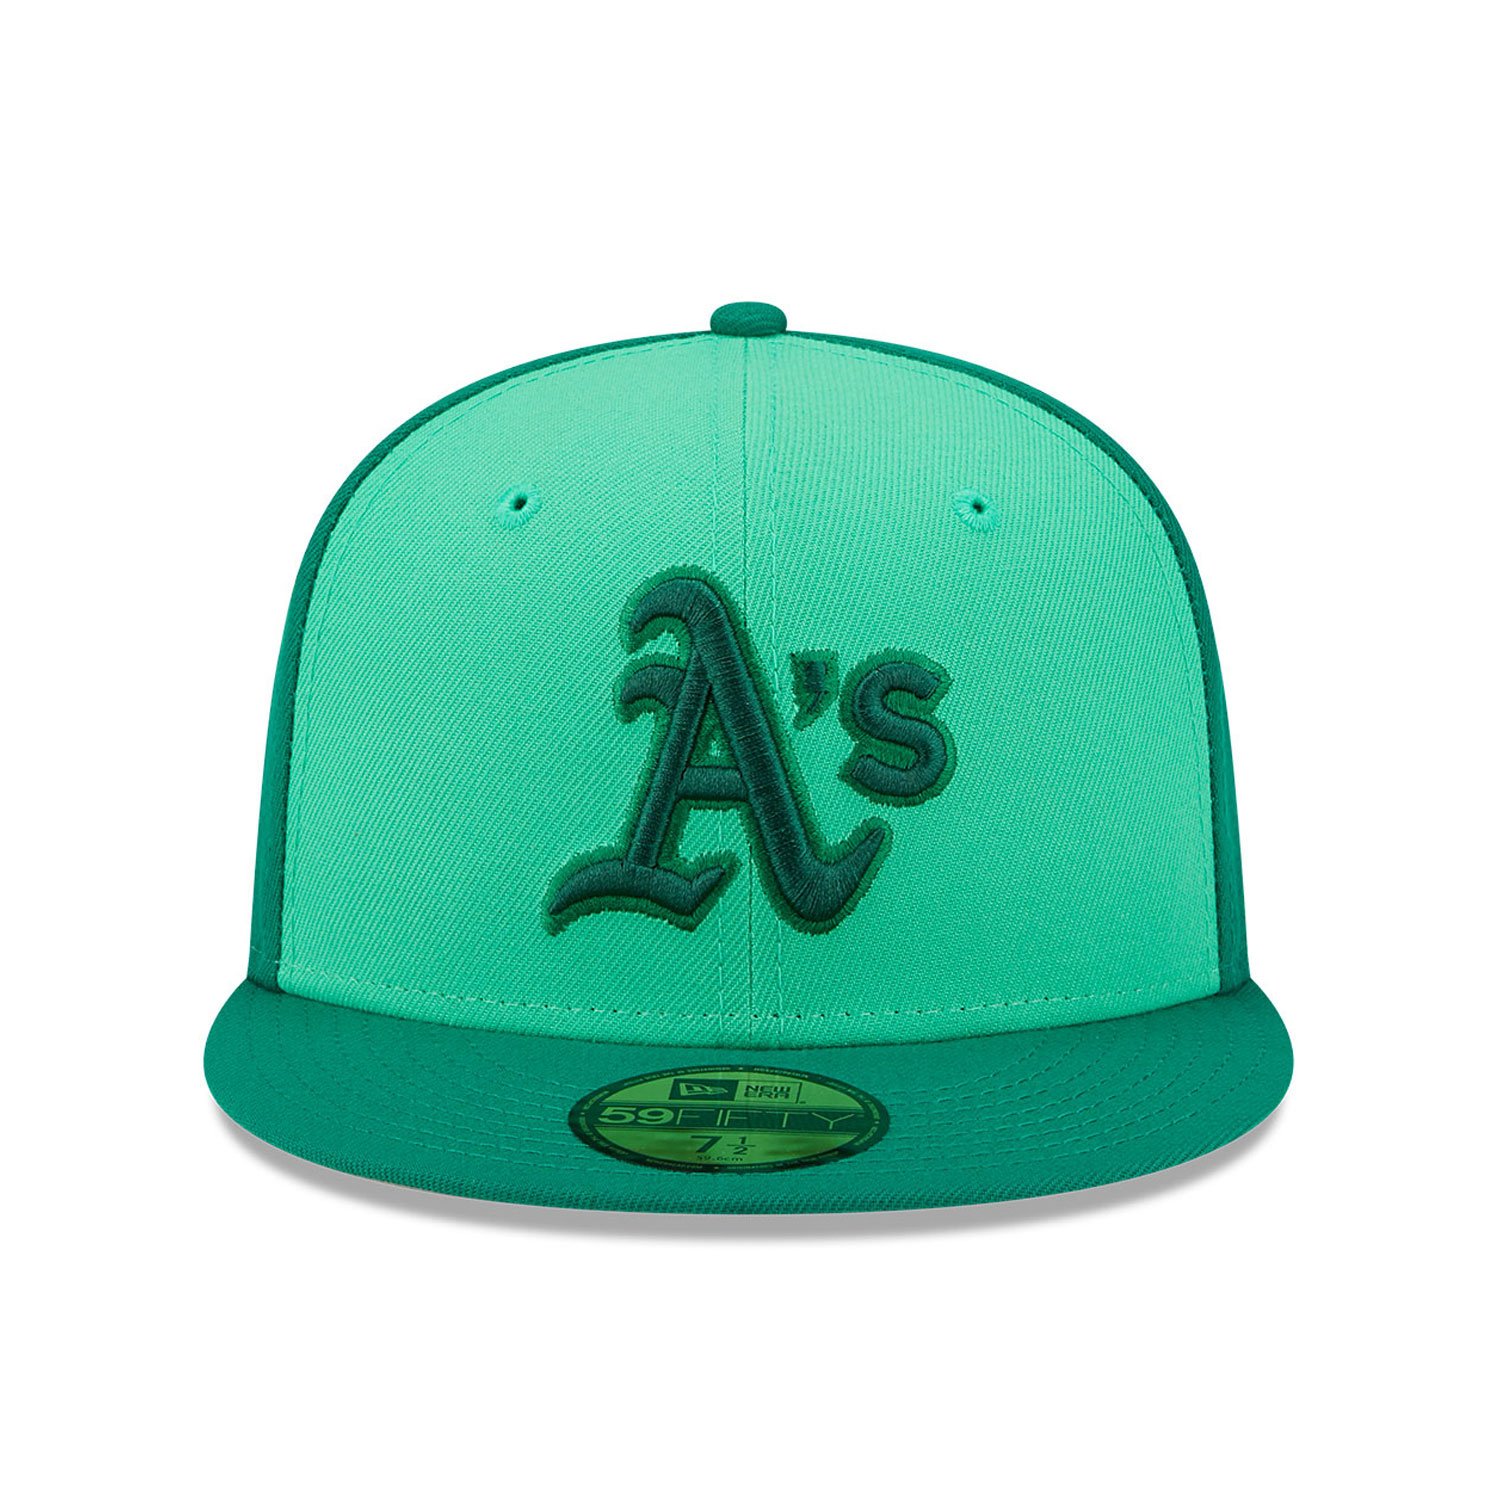 Oakland Athletics Tri Tone Team Green 59FIFTY Fitted Cap